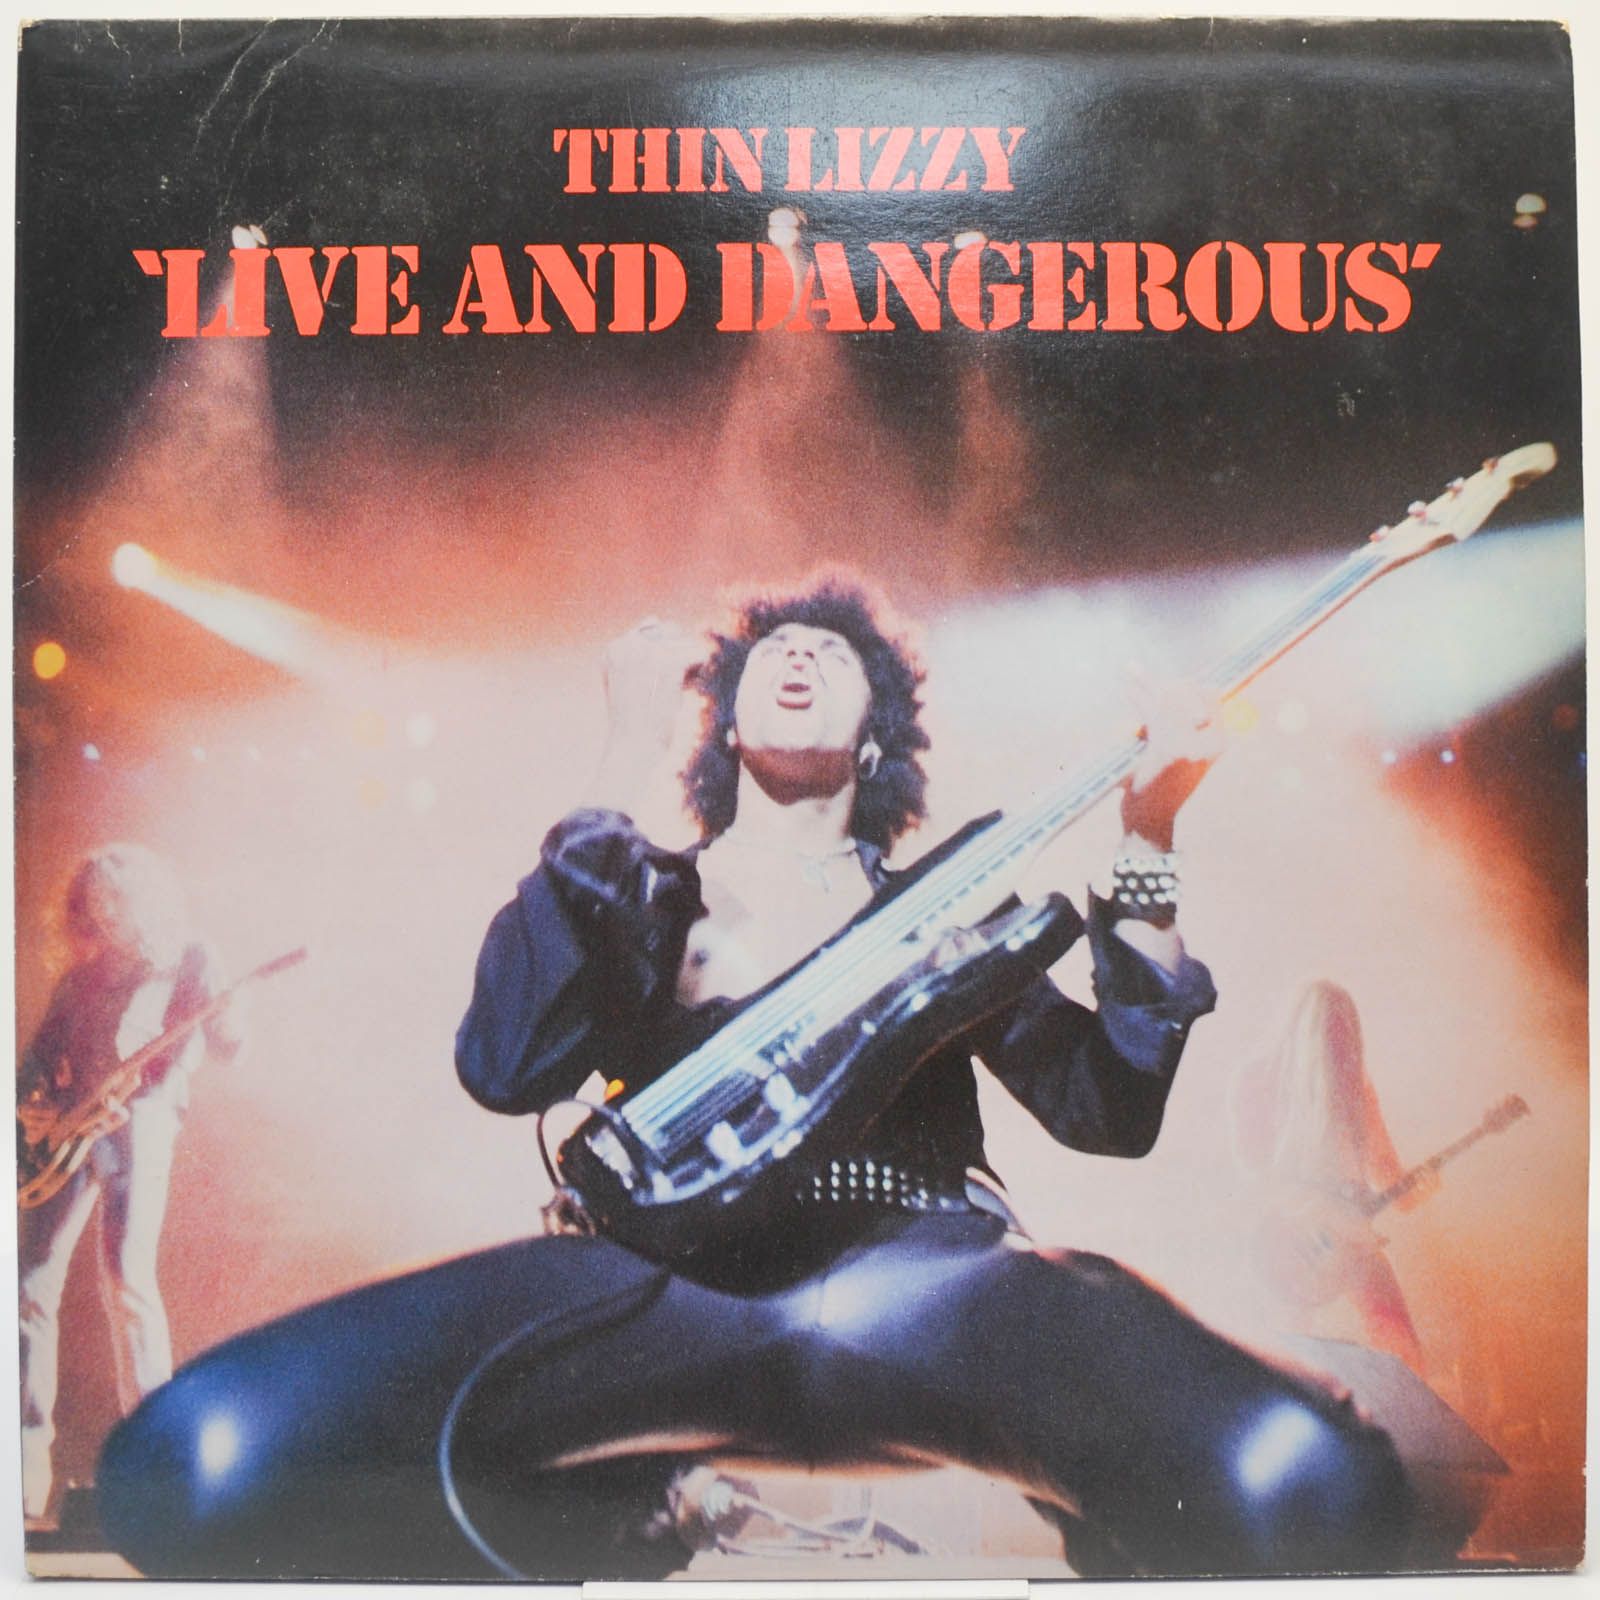 Thin Lizzy — Live And Dangerous (2LP, 1-st, UK), 1978